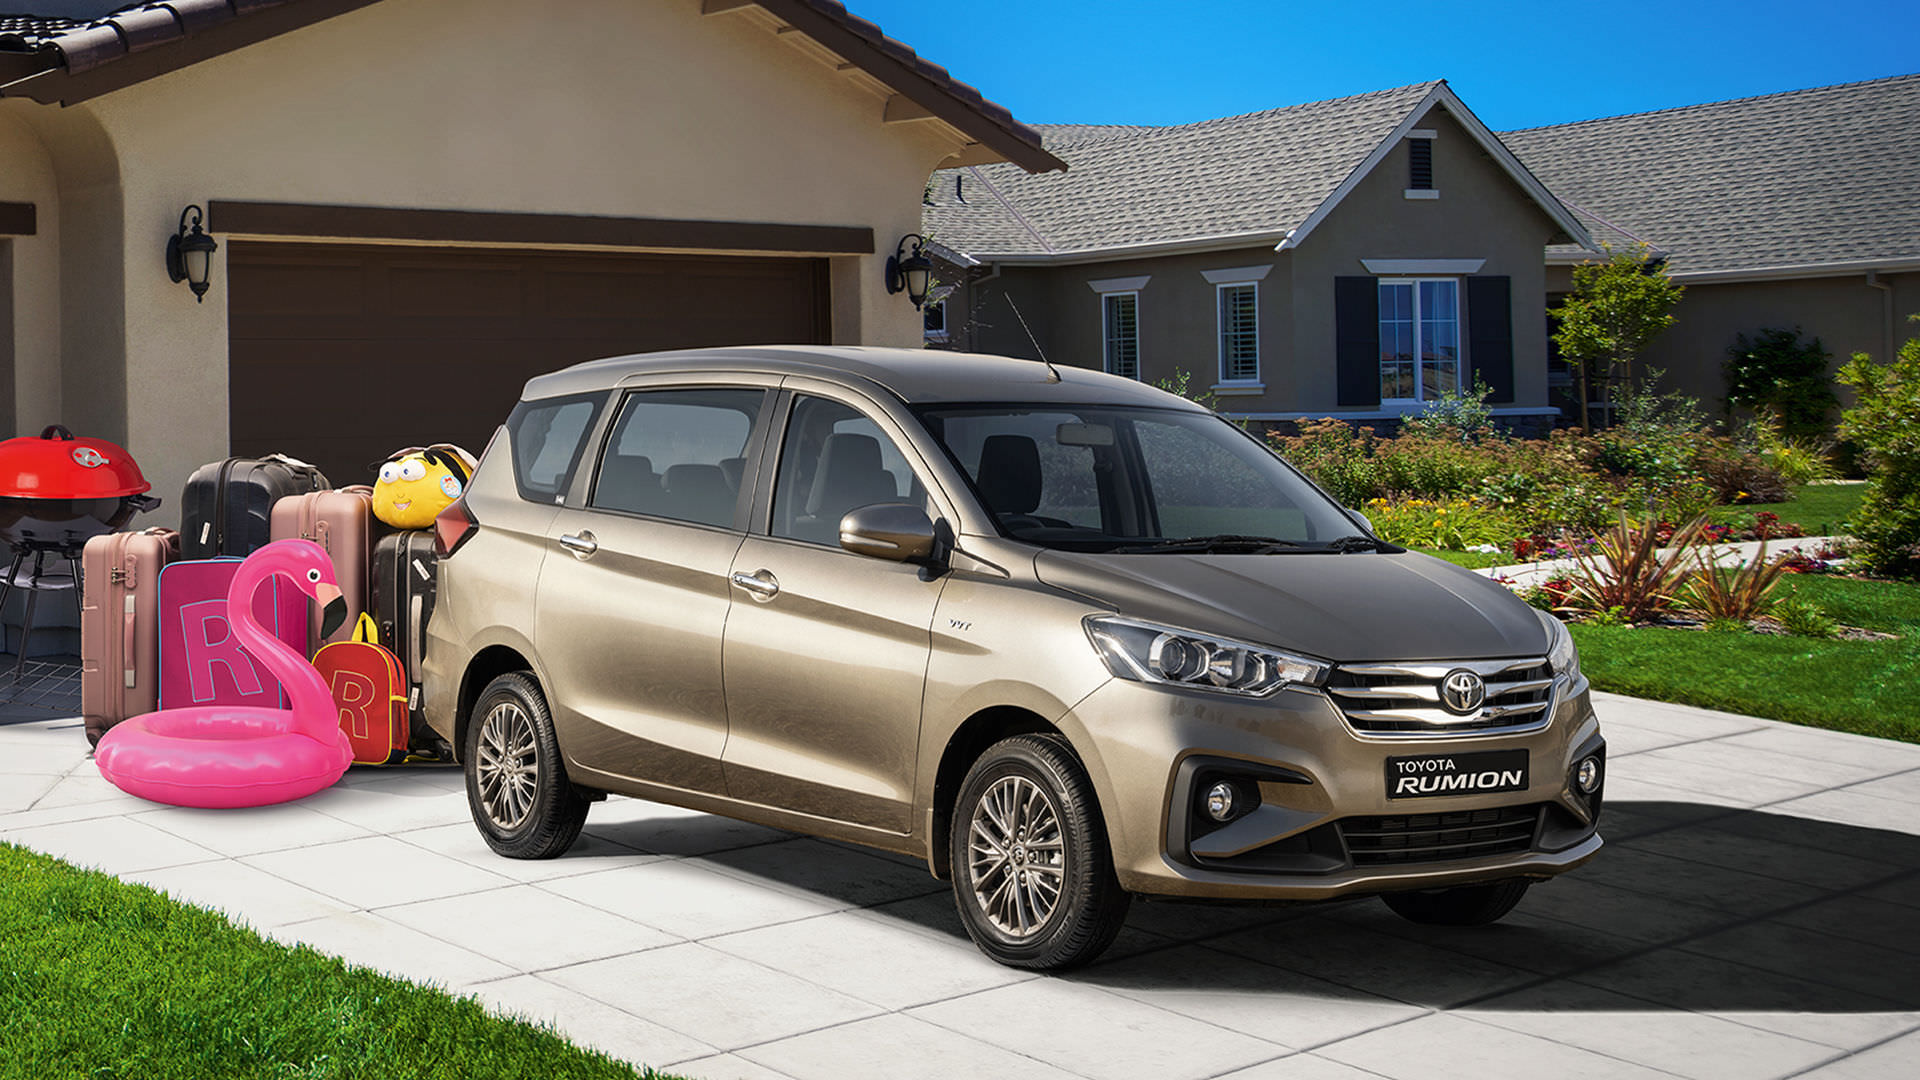 gold Toyota Rumion parked outside of suburban home with luggage